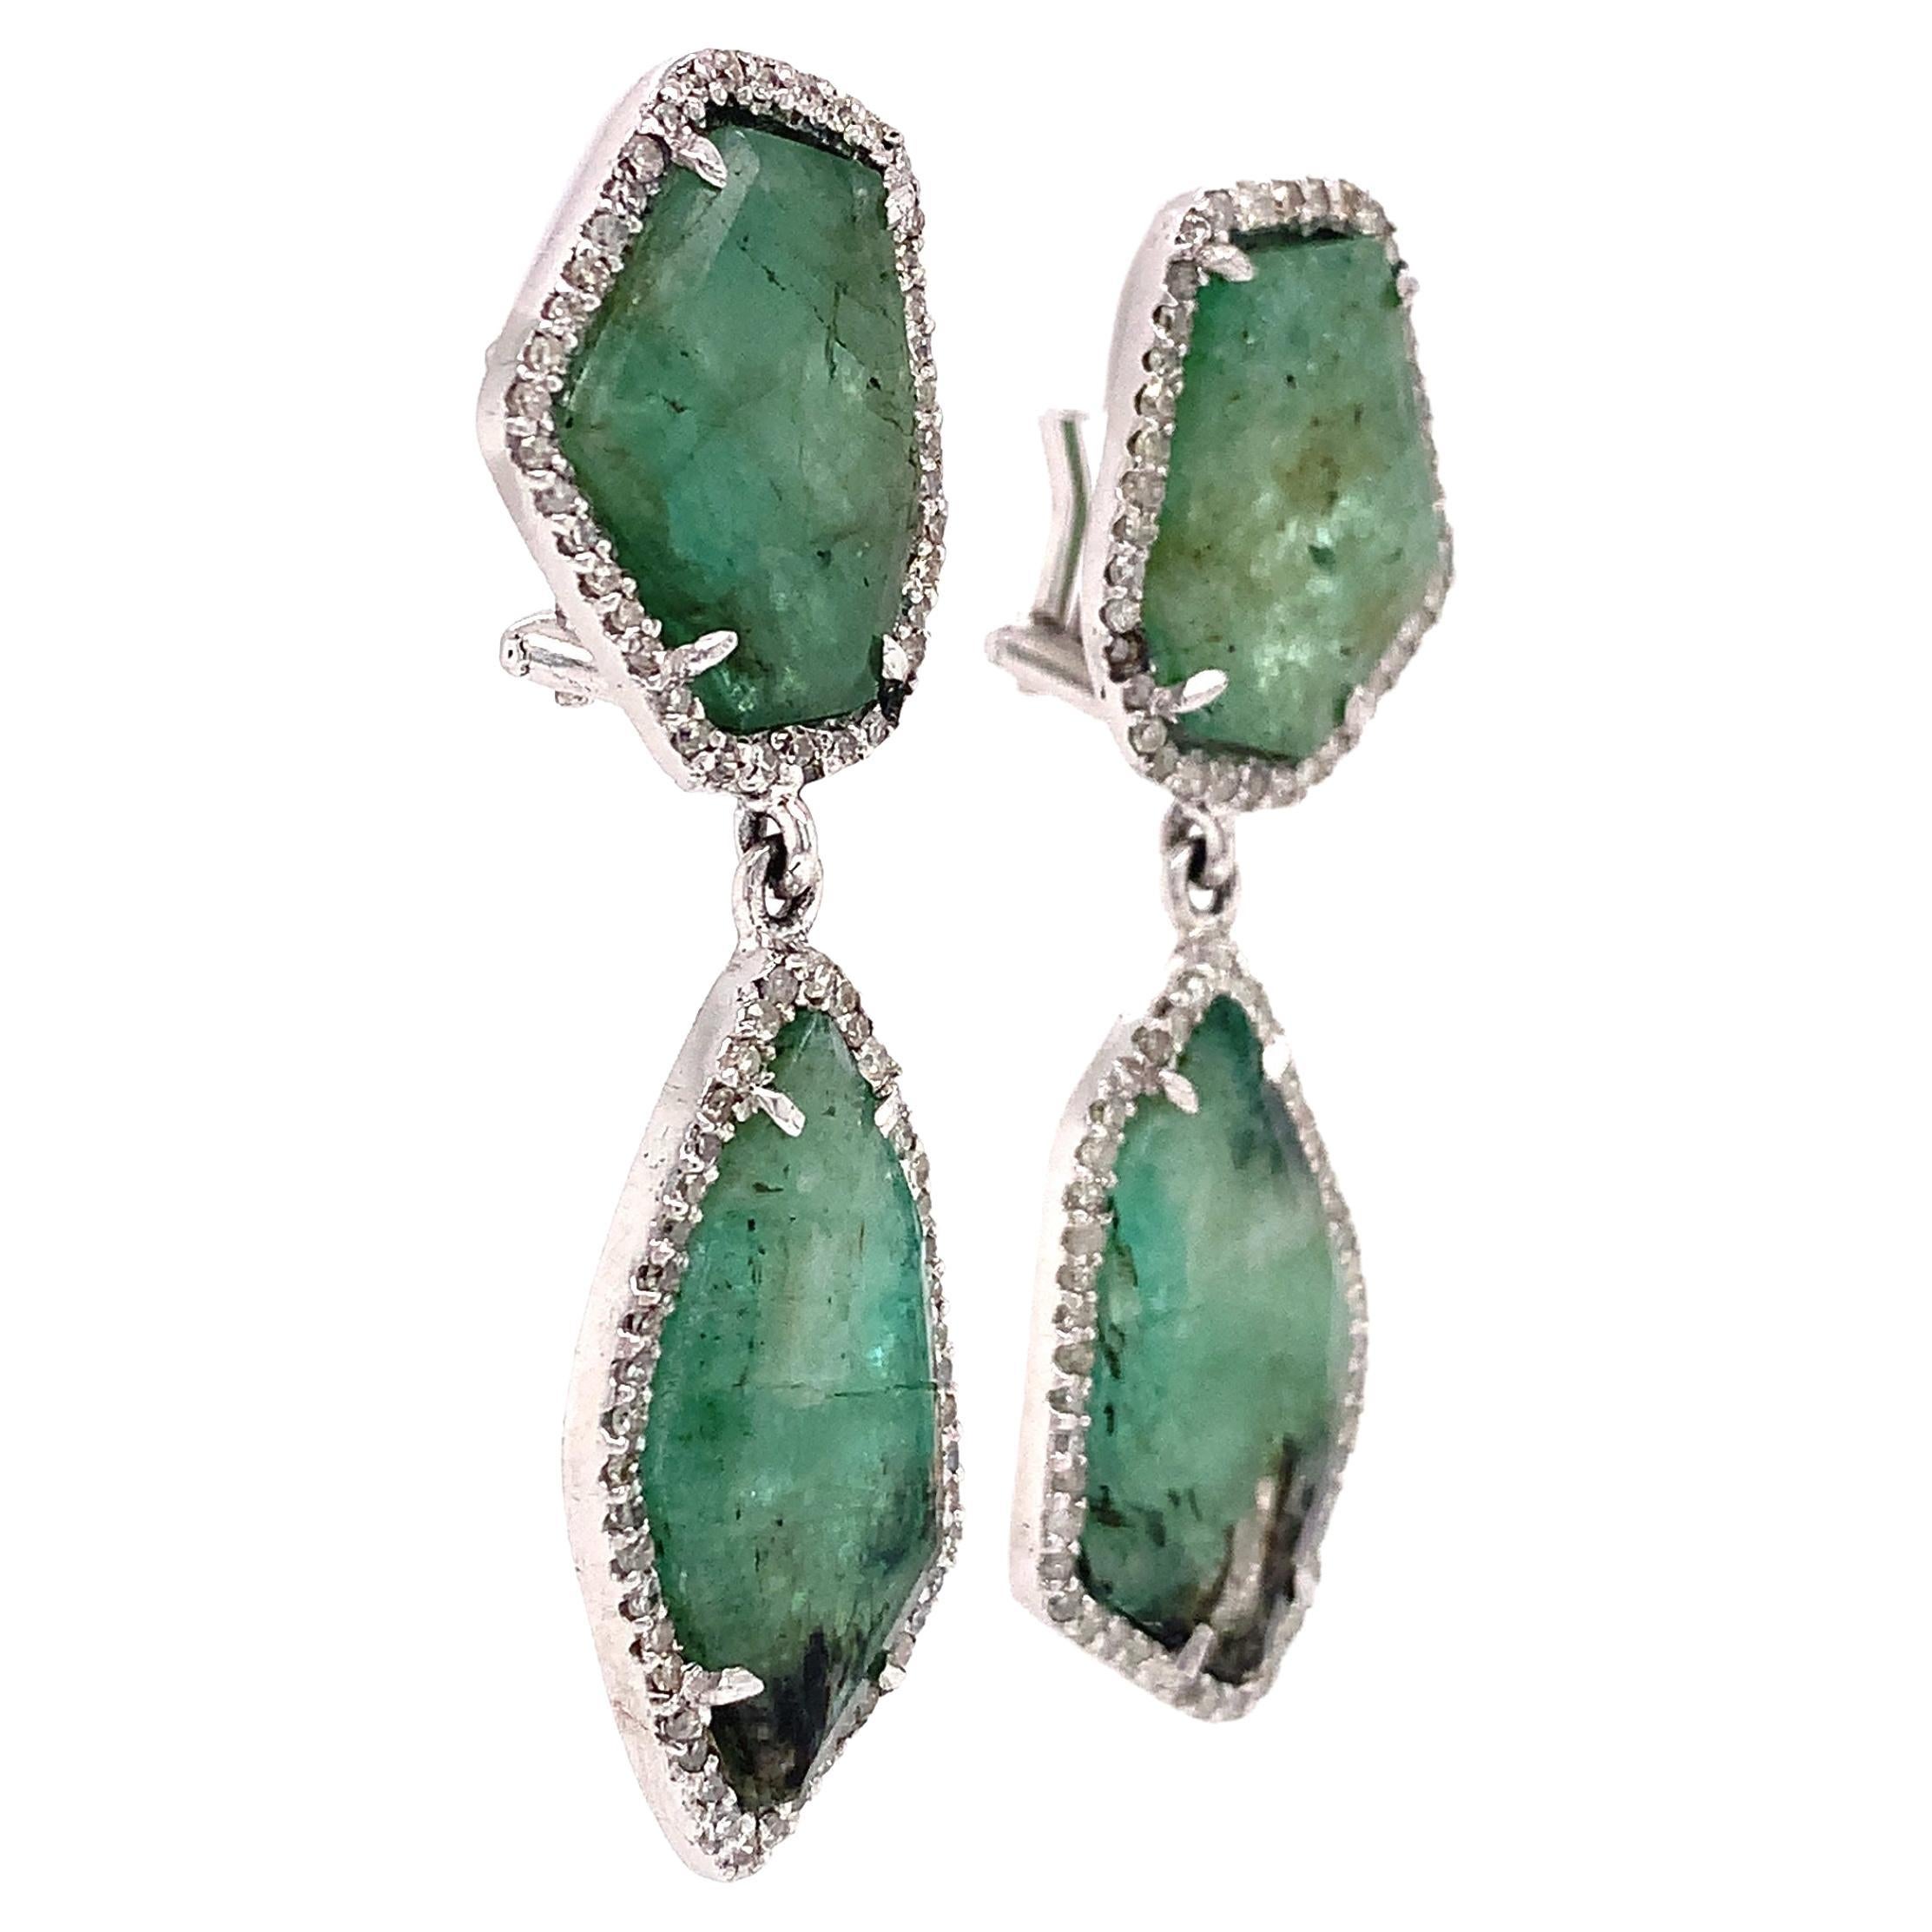 Natural Emerald slices wrapped in Diamonds.  

Emeralds: 23.50ct total weight.
Diamonds: 0.89ct total weight.